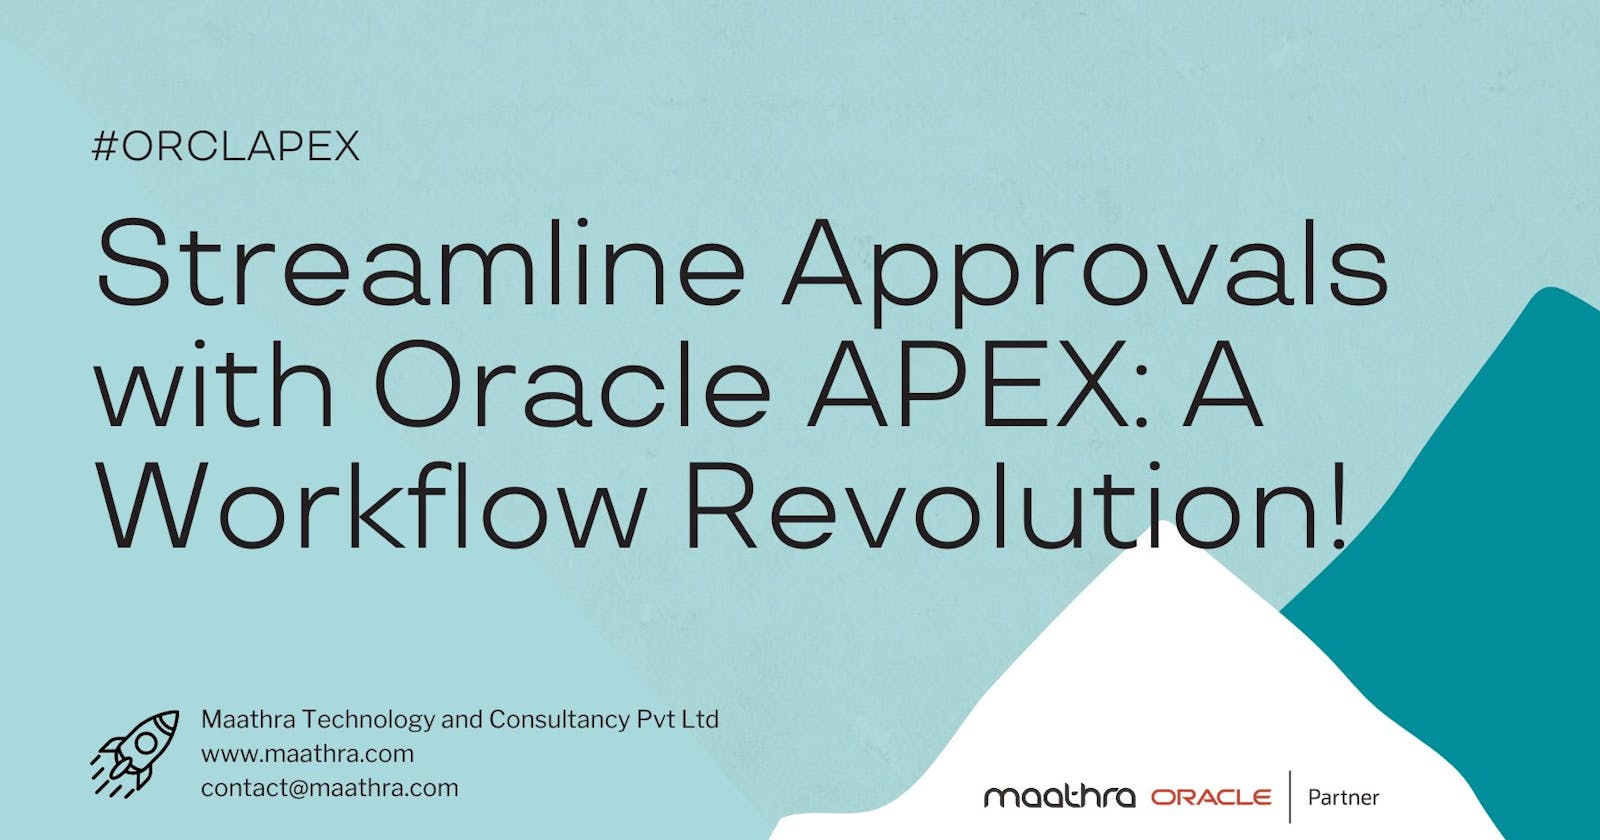 Oracle APEX Use Cases: Streamline Approvals